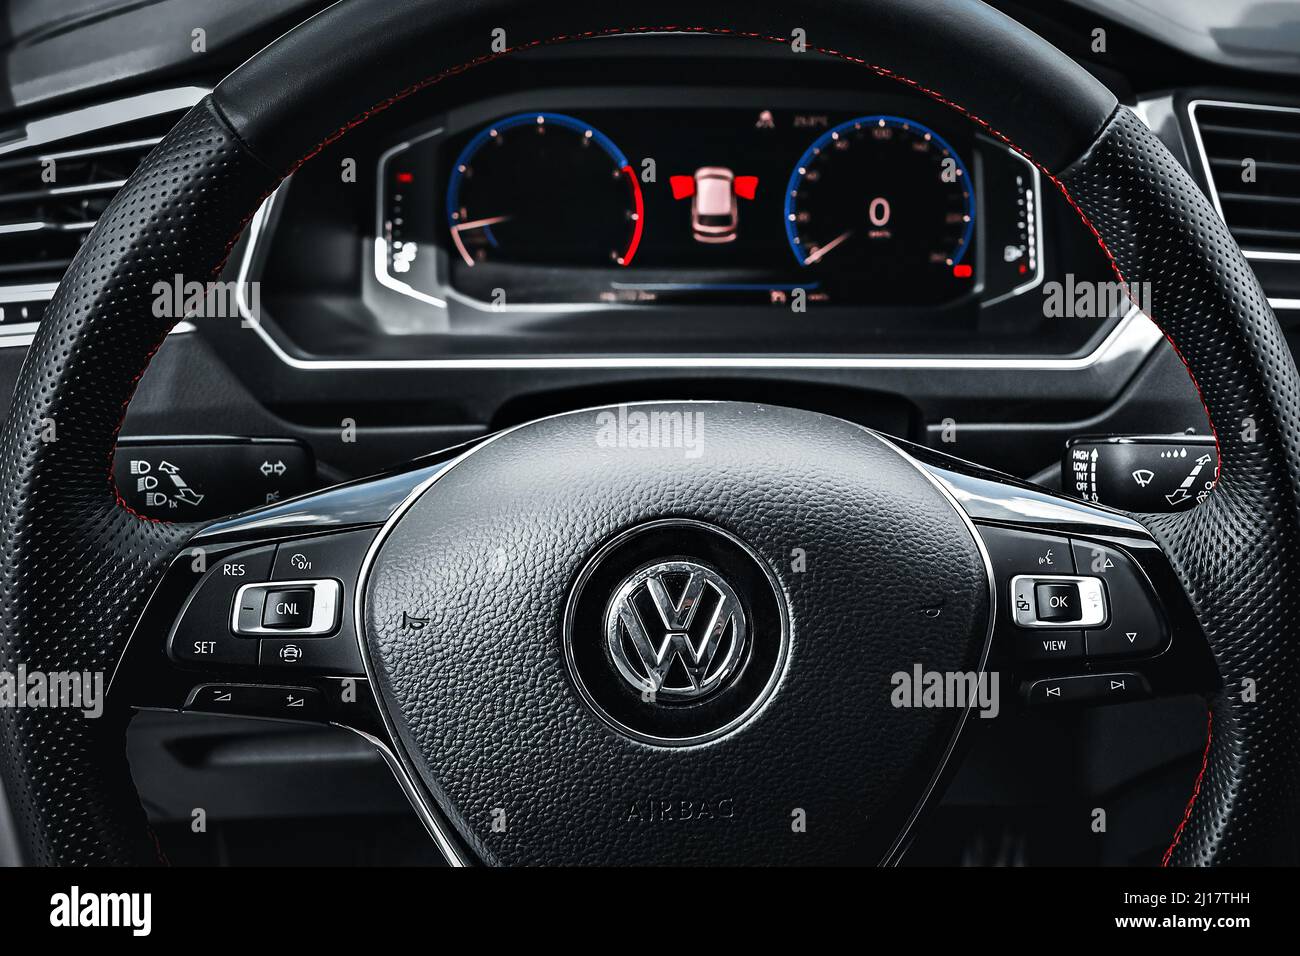 Barnaul, Russia 11.07.2021. Interior of Volkswagen Tiguan crossover. Details of steering wheel with logo and instrument panel. First-person view. Editorial use. Stock Photo